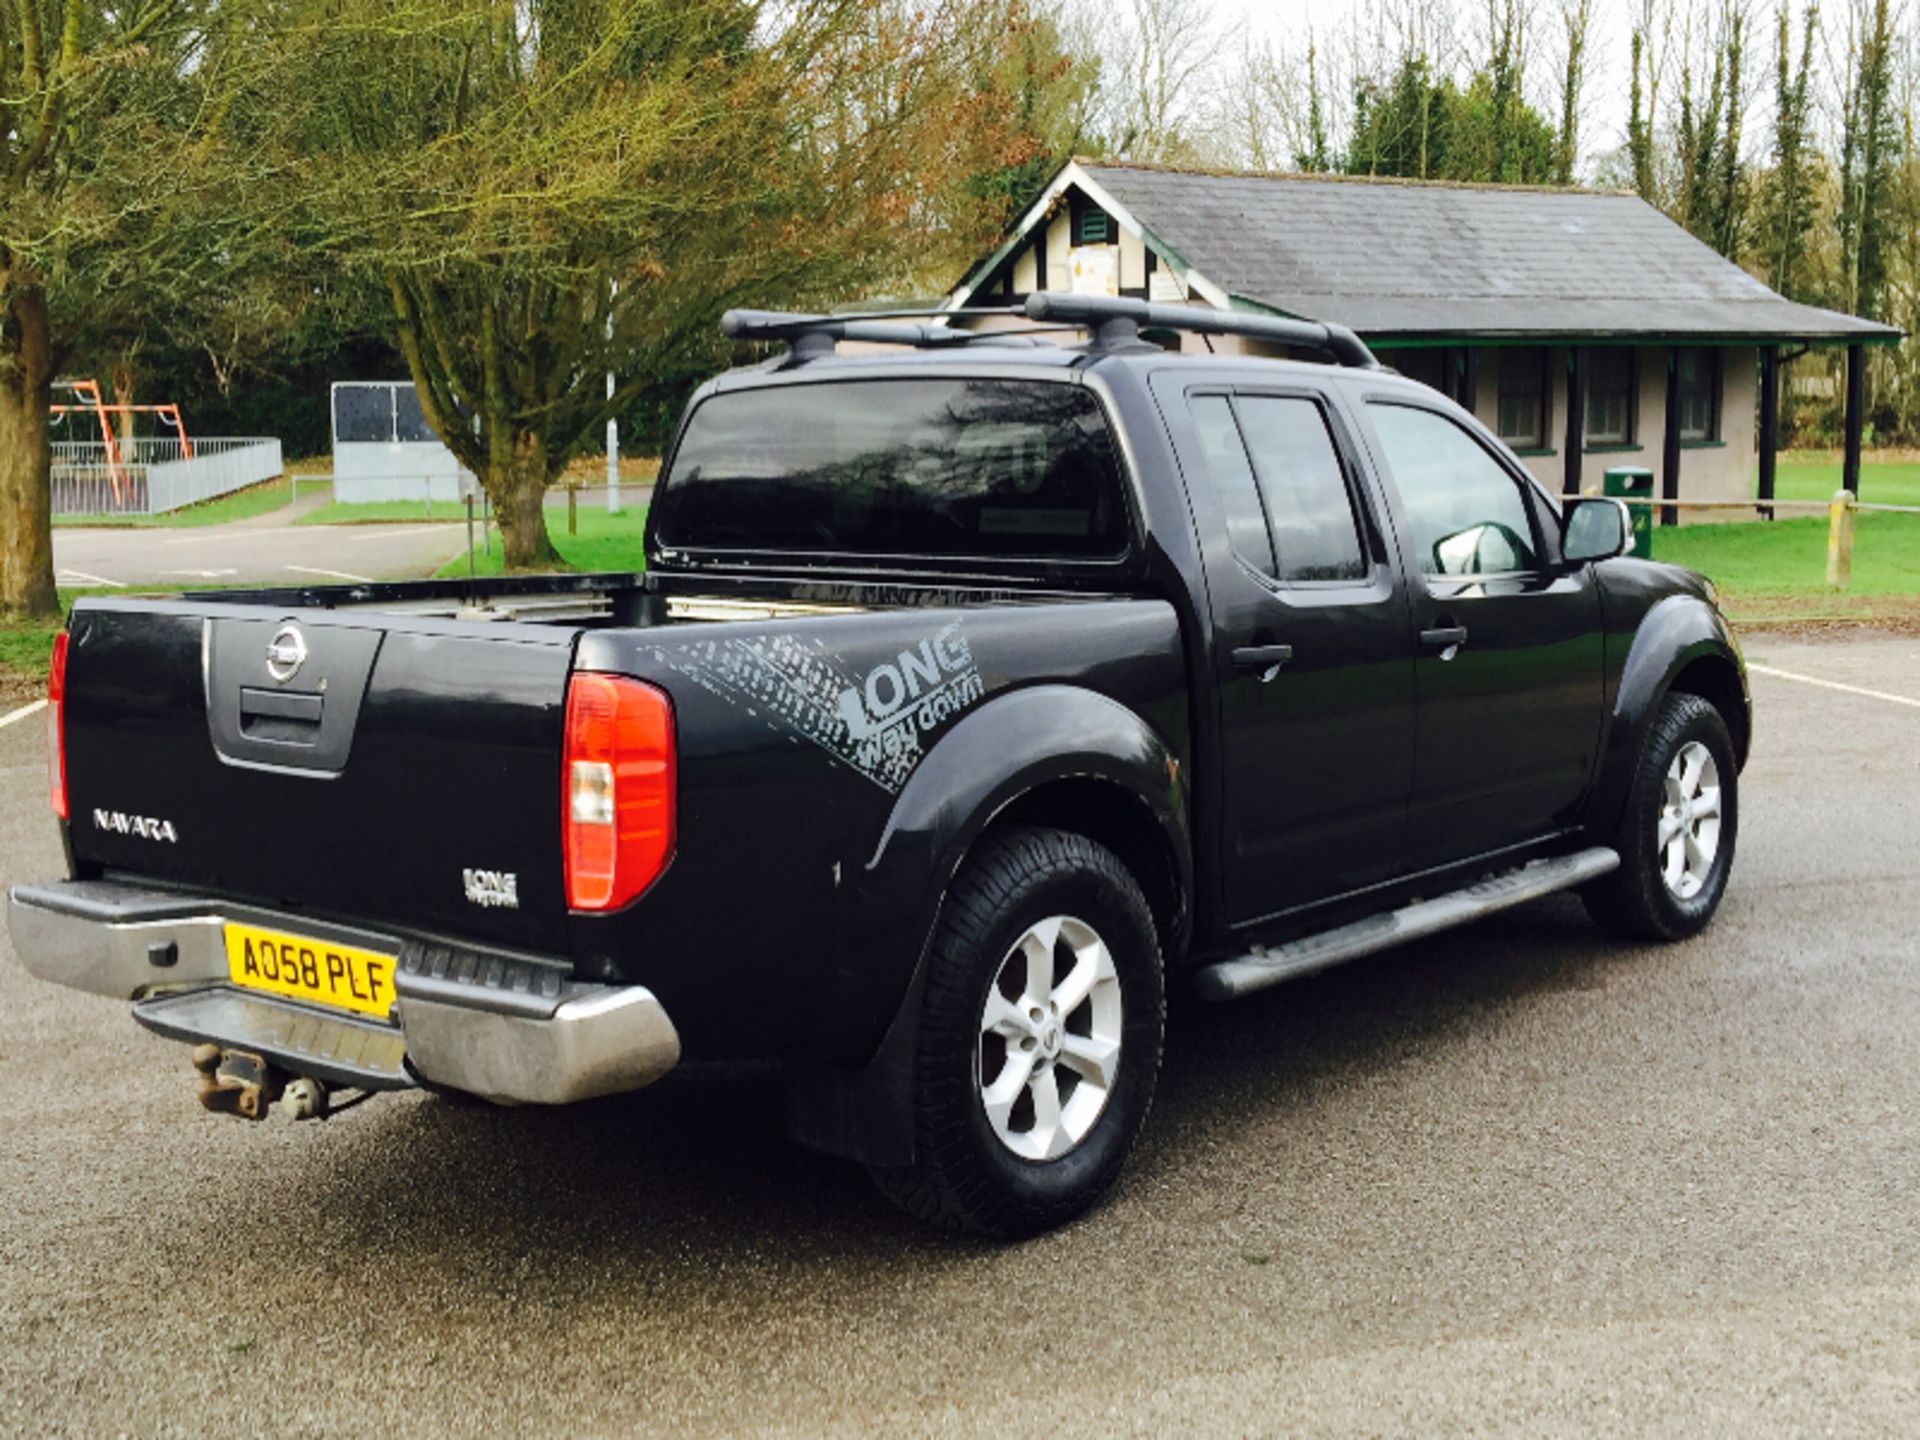 (ON SALE) NISSAN NAVARA 'LONG WAY DOWN' (2009) DOUBLE CAB PICK-UP "BLACK EDITION" 2.5 DCI  (NO VAT) - Image 8 of 15